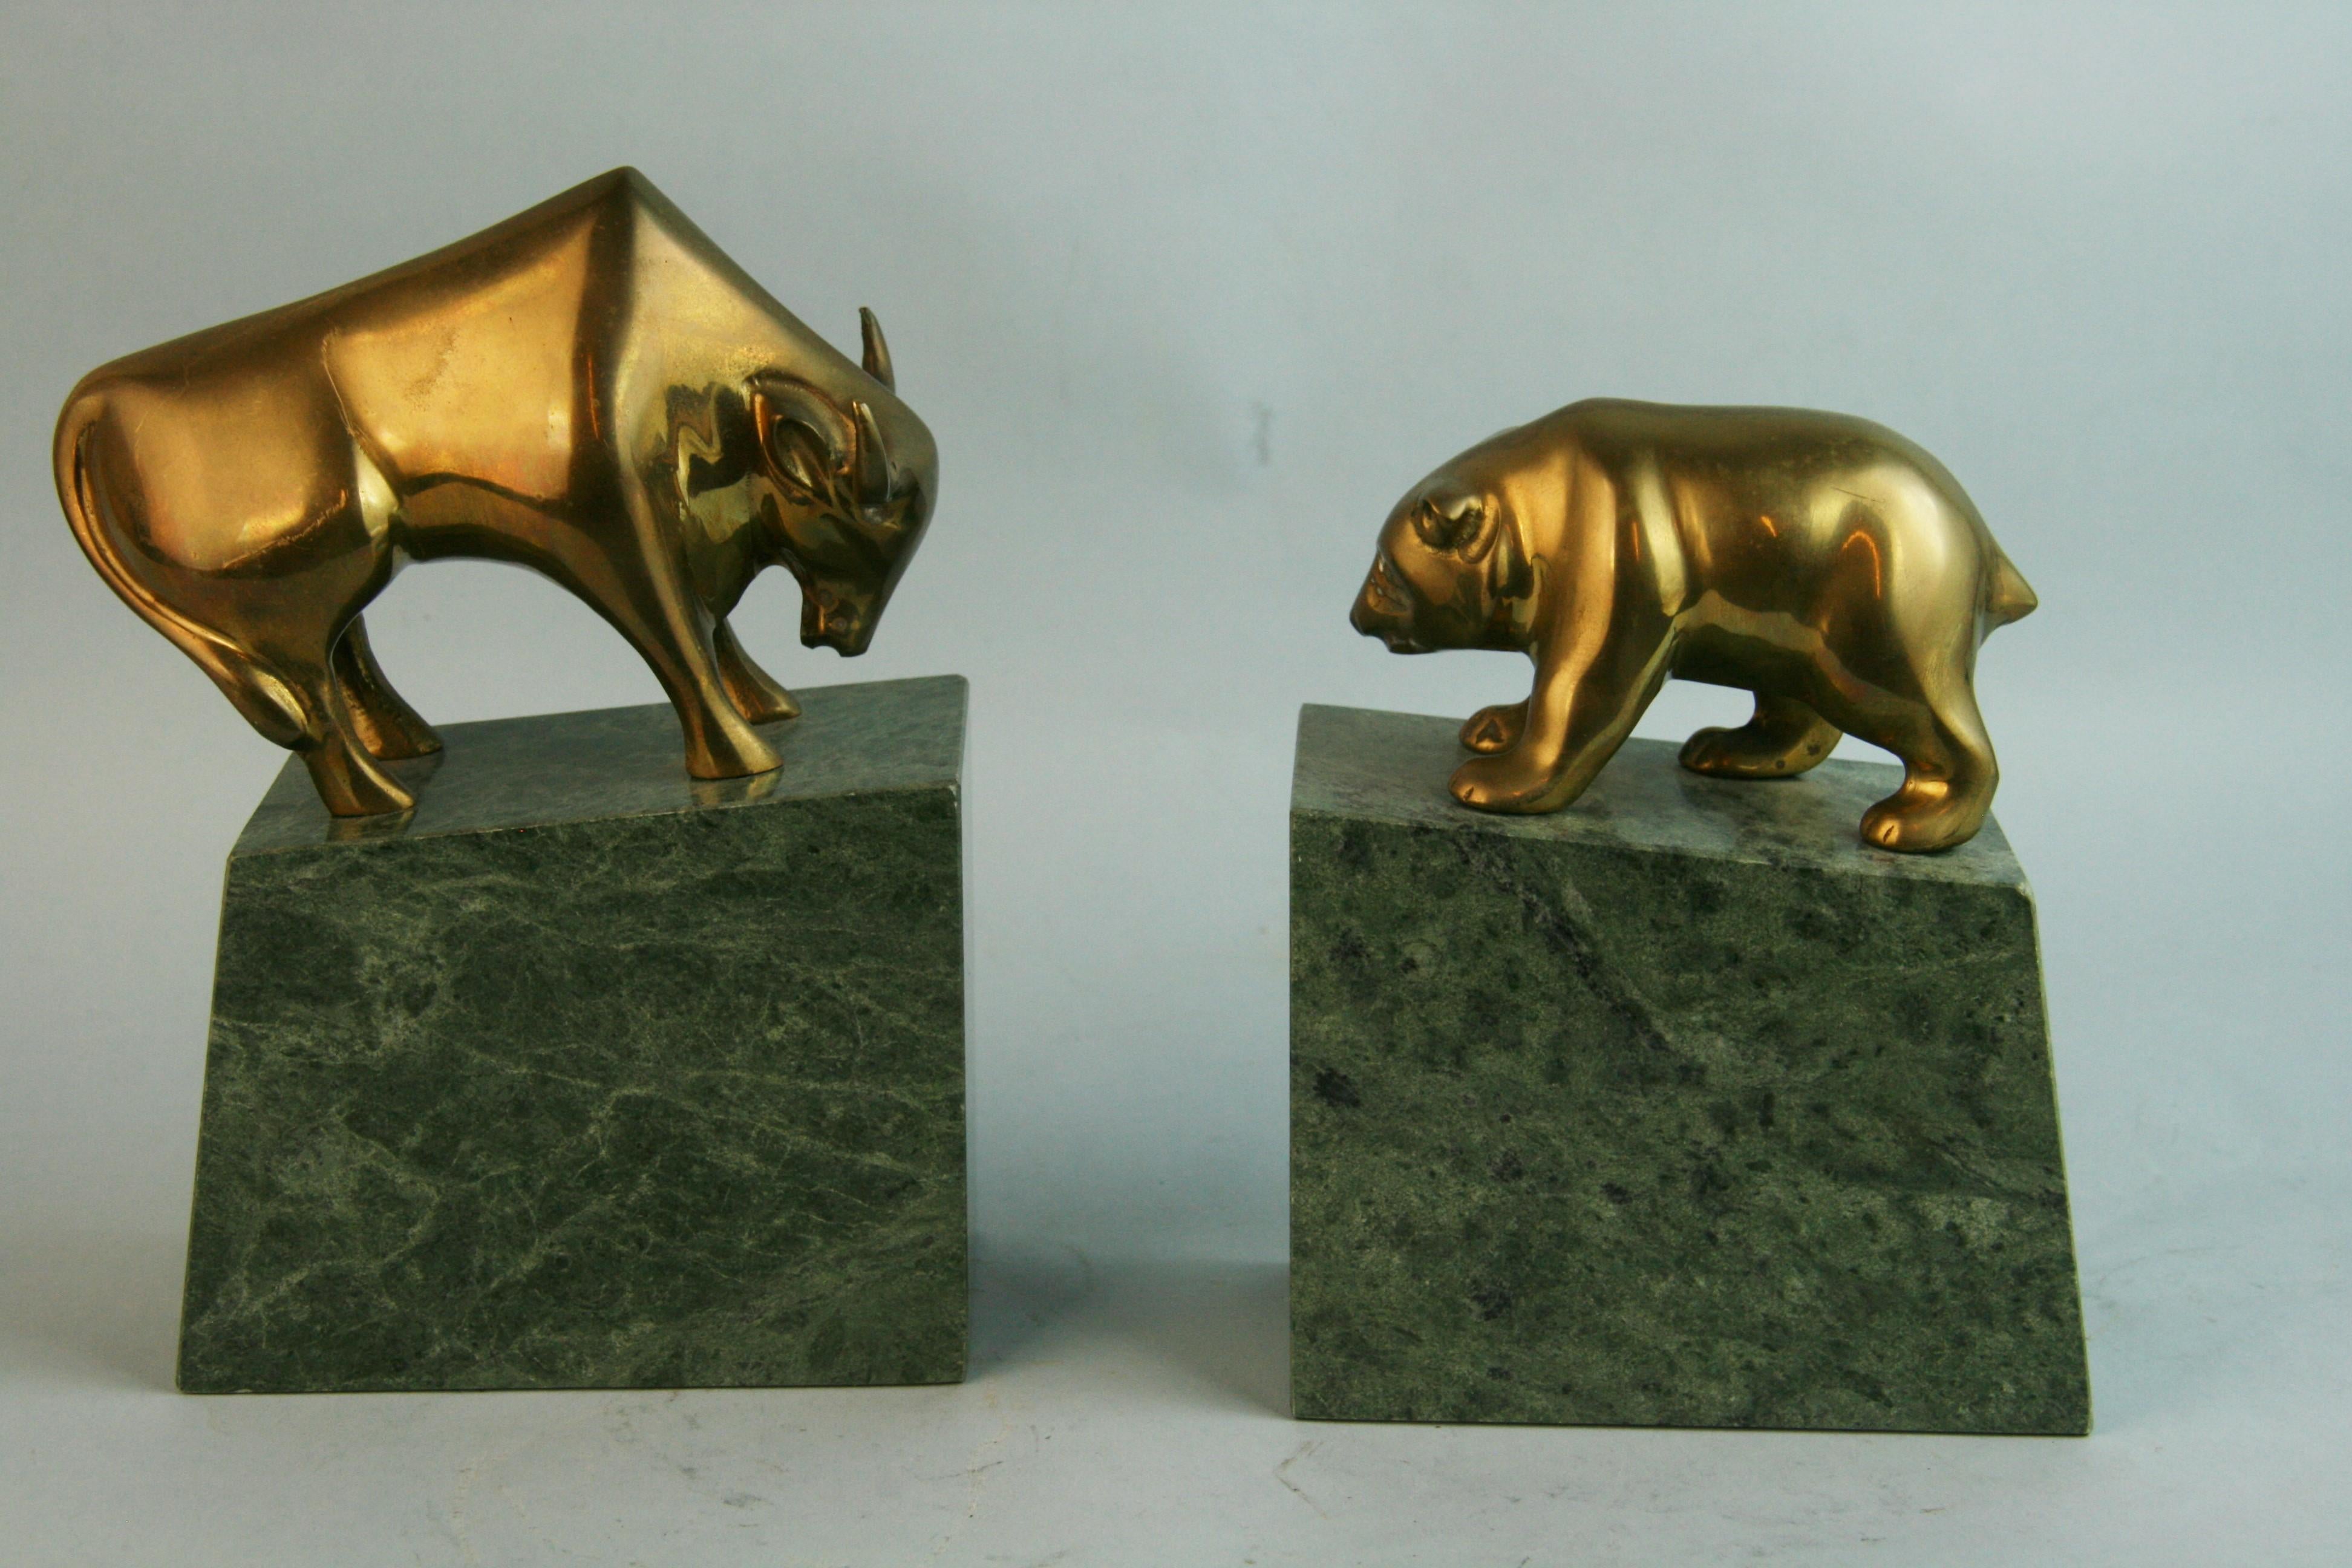 1167 Italian art deco style bull and bear bookends/paperweights solid brass on marble bases
bull 2.5x5.5x8